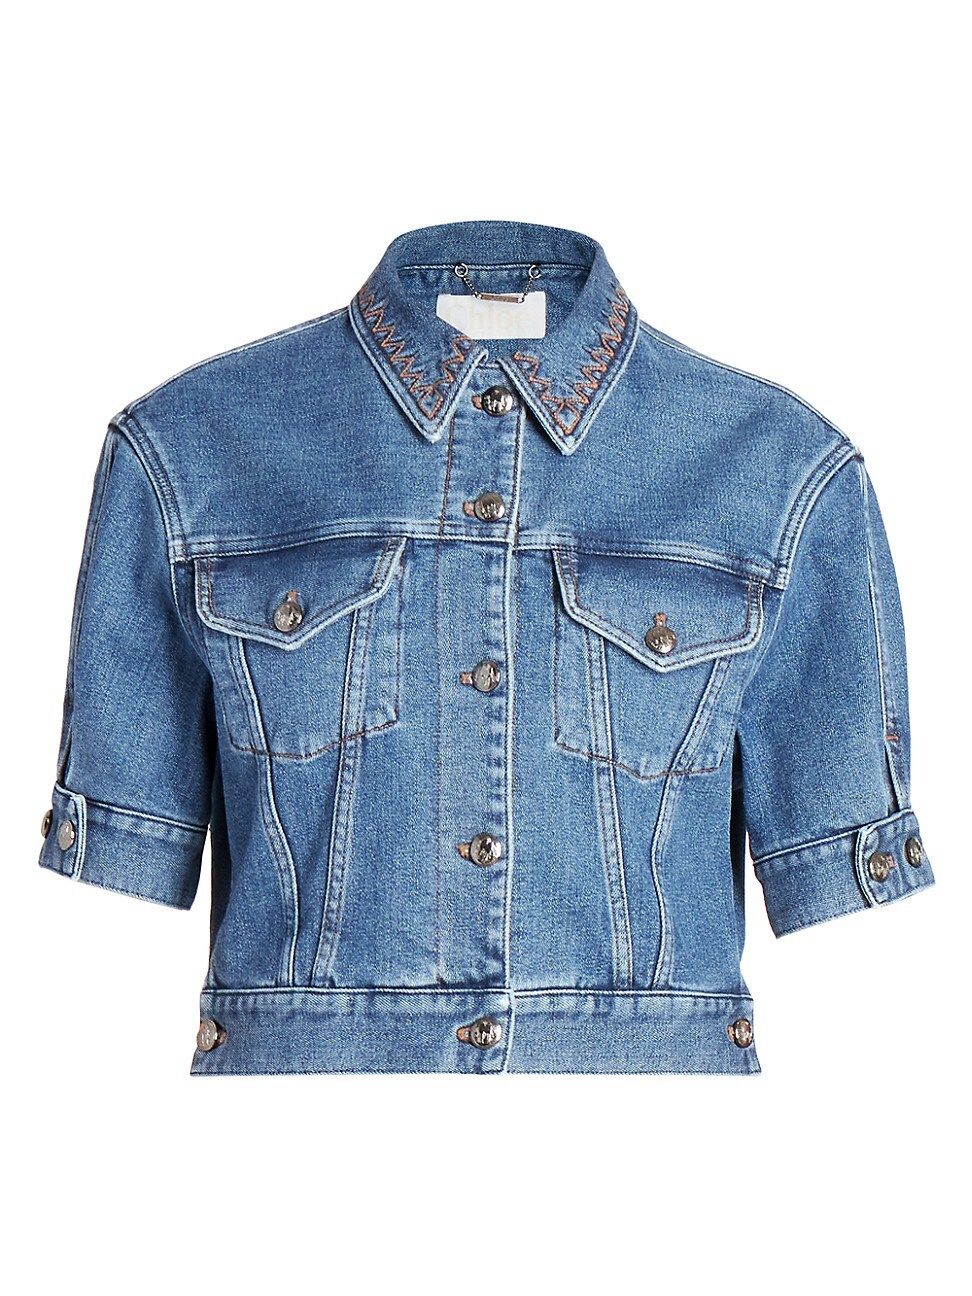 Chloé Women's Recycled Stretch Denim Cropped Jacket - Moonlight Blue - Size 4 | Saks Fifth Avenue